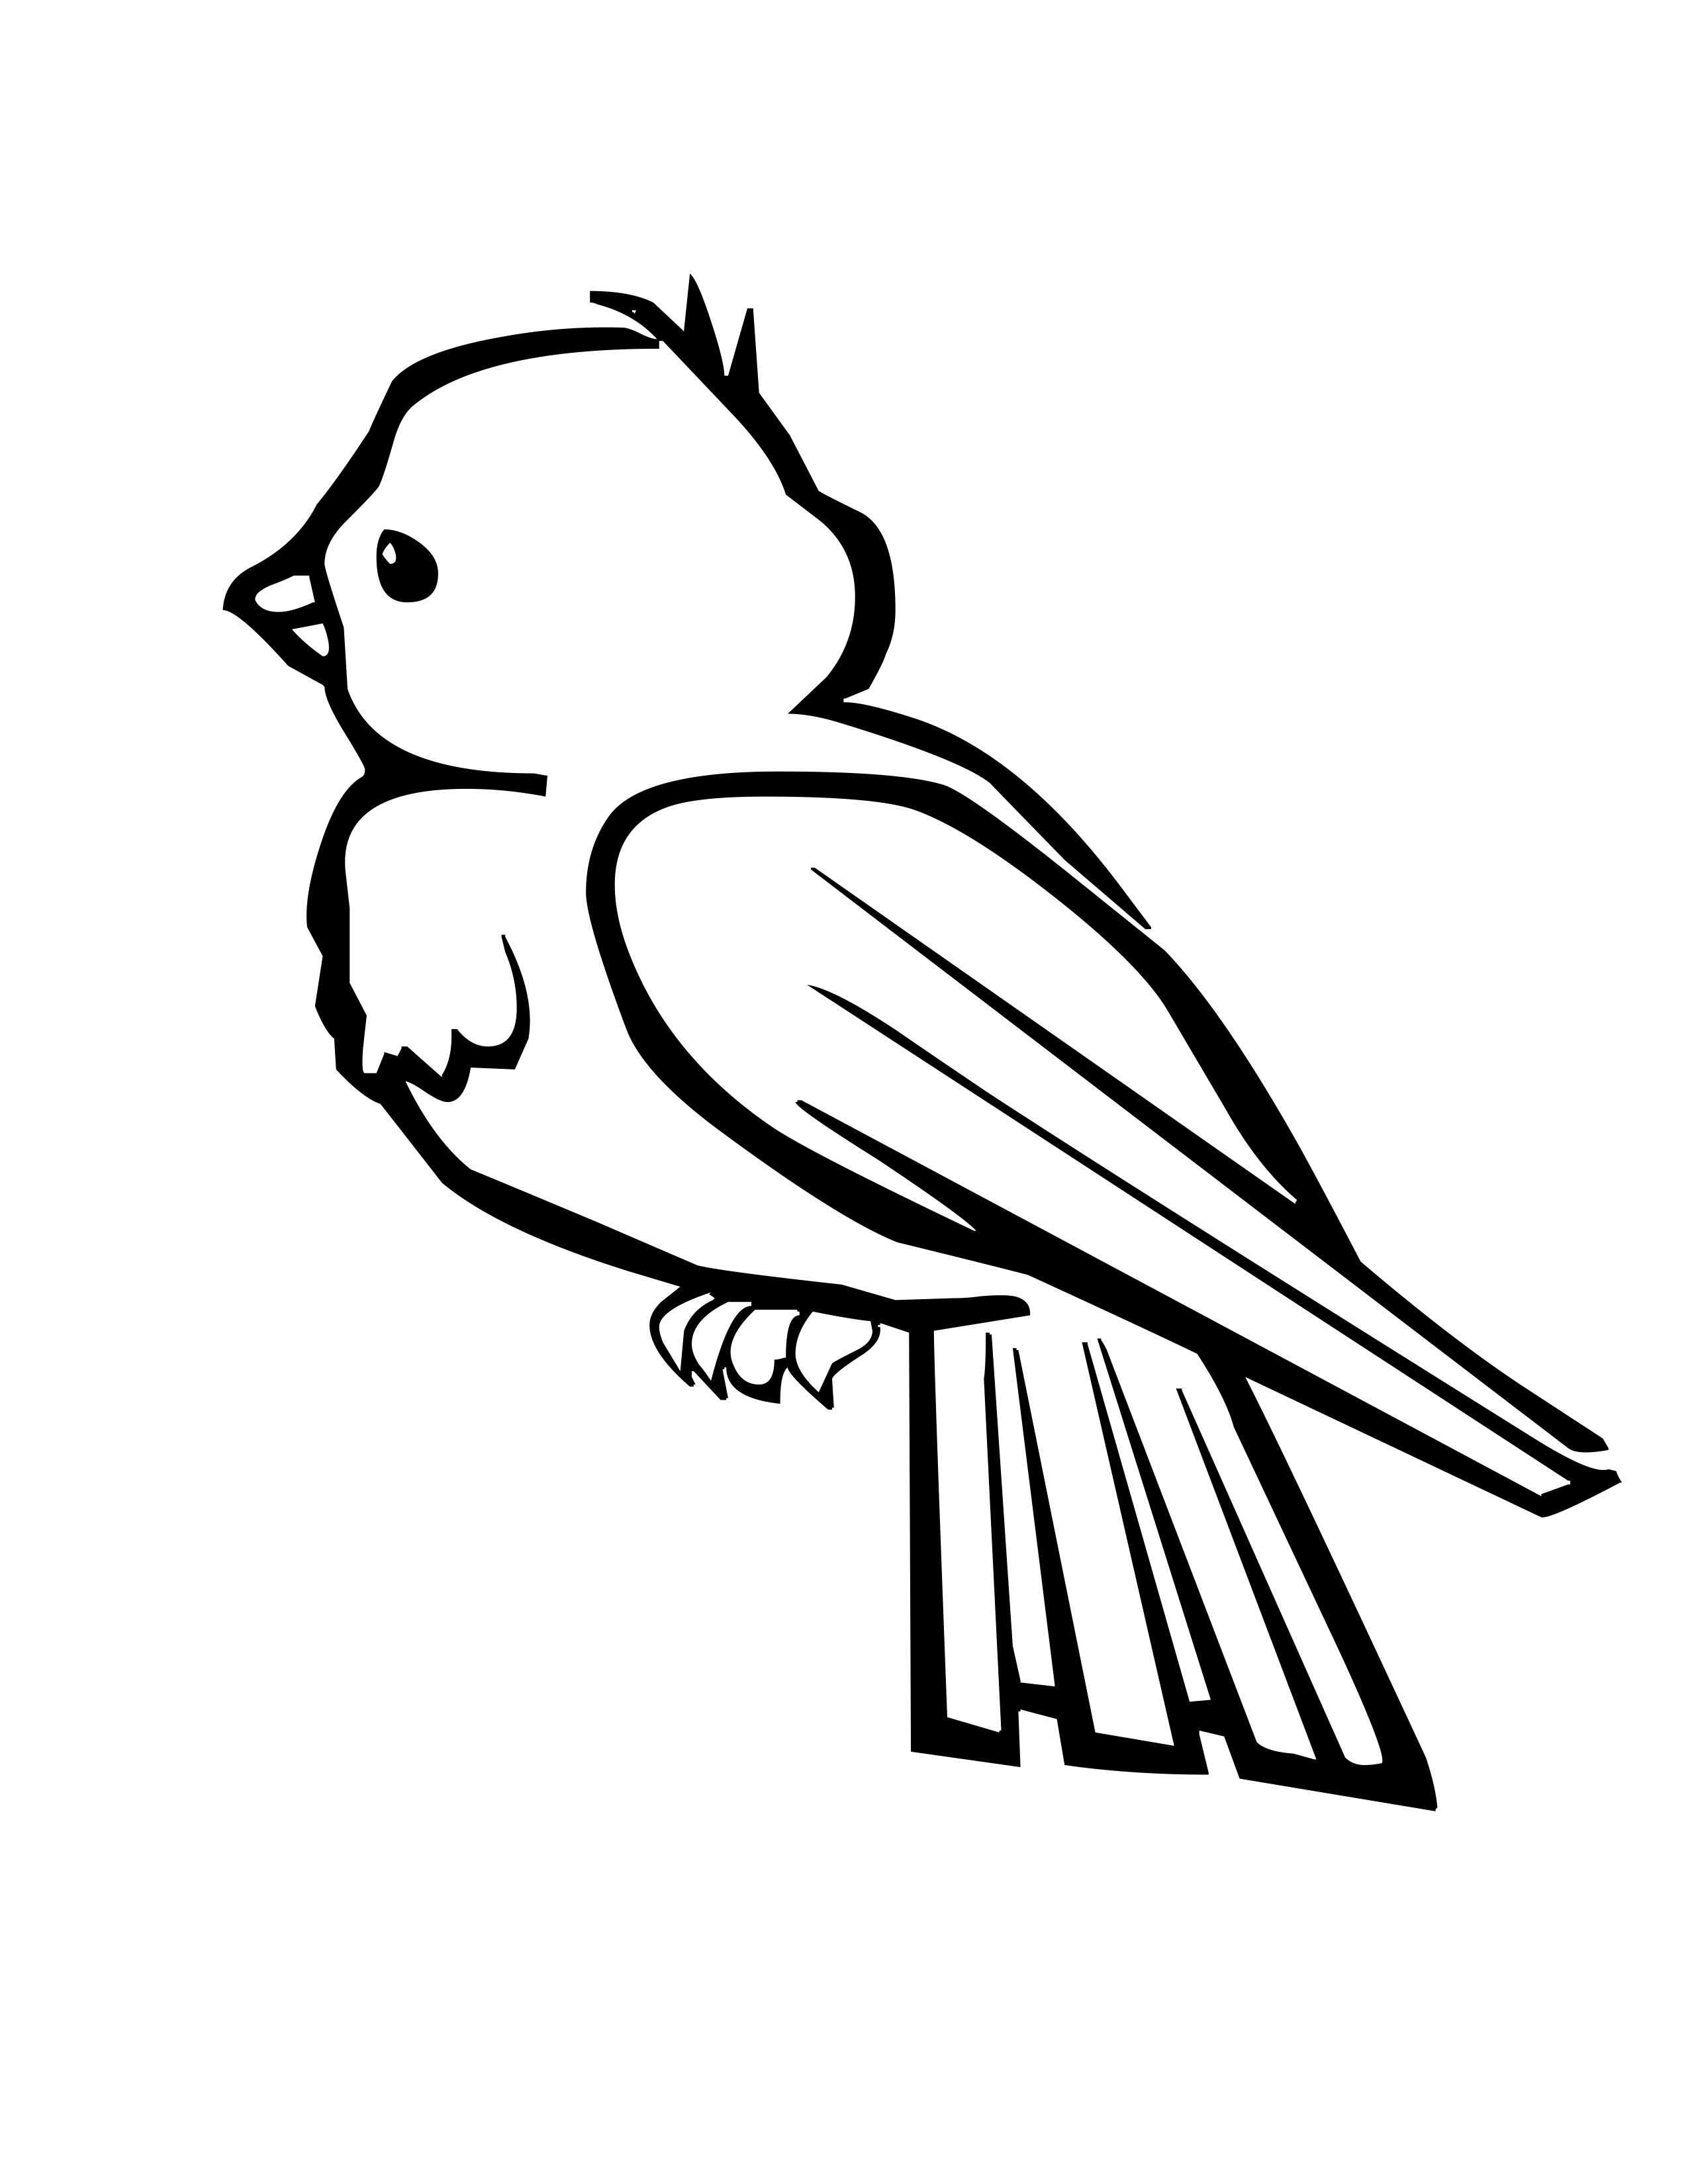 coloring page of bluebirds | Angry Birds Coloring Pages Bluebird ...